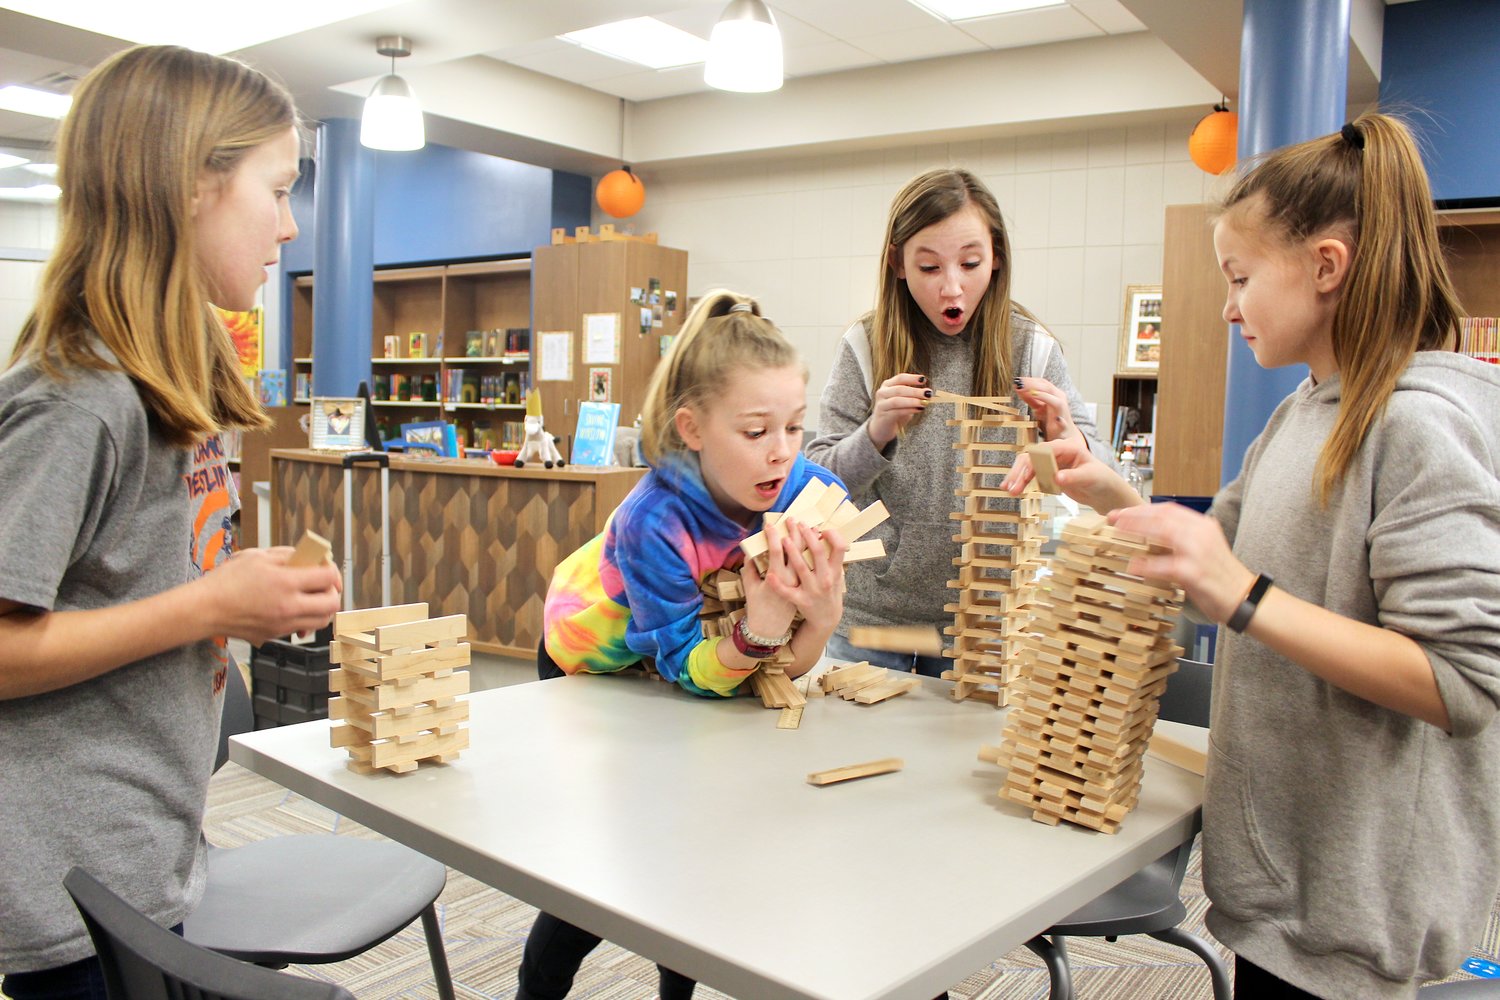 Pleasant Hill fifth graders Paige Yarger, from left, Gracie Ratcliff, Hannah Barnes and Bailey Grote, all age 11, learn why space is a valuable commodity Thursday in the school's media center while building towers with Keva plank sets.